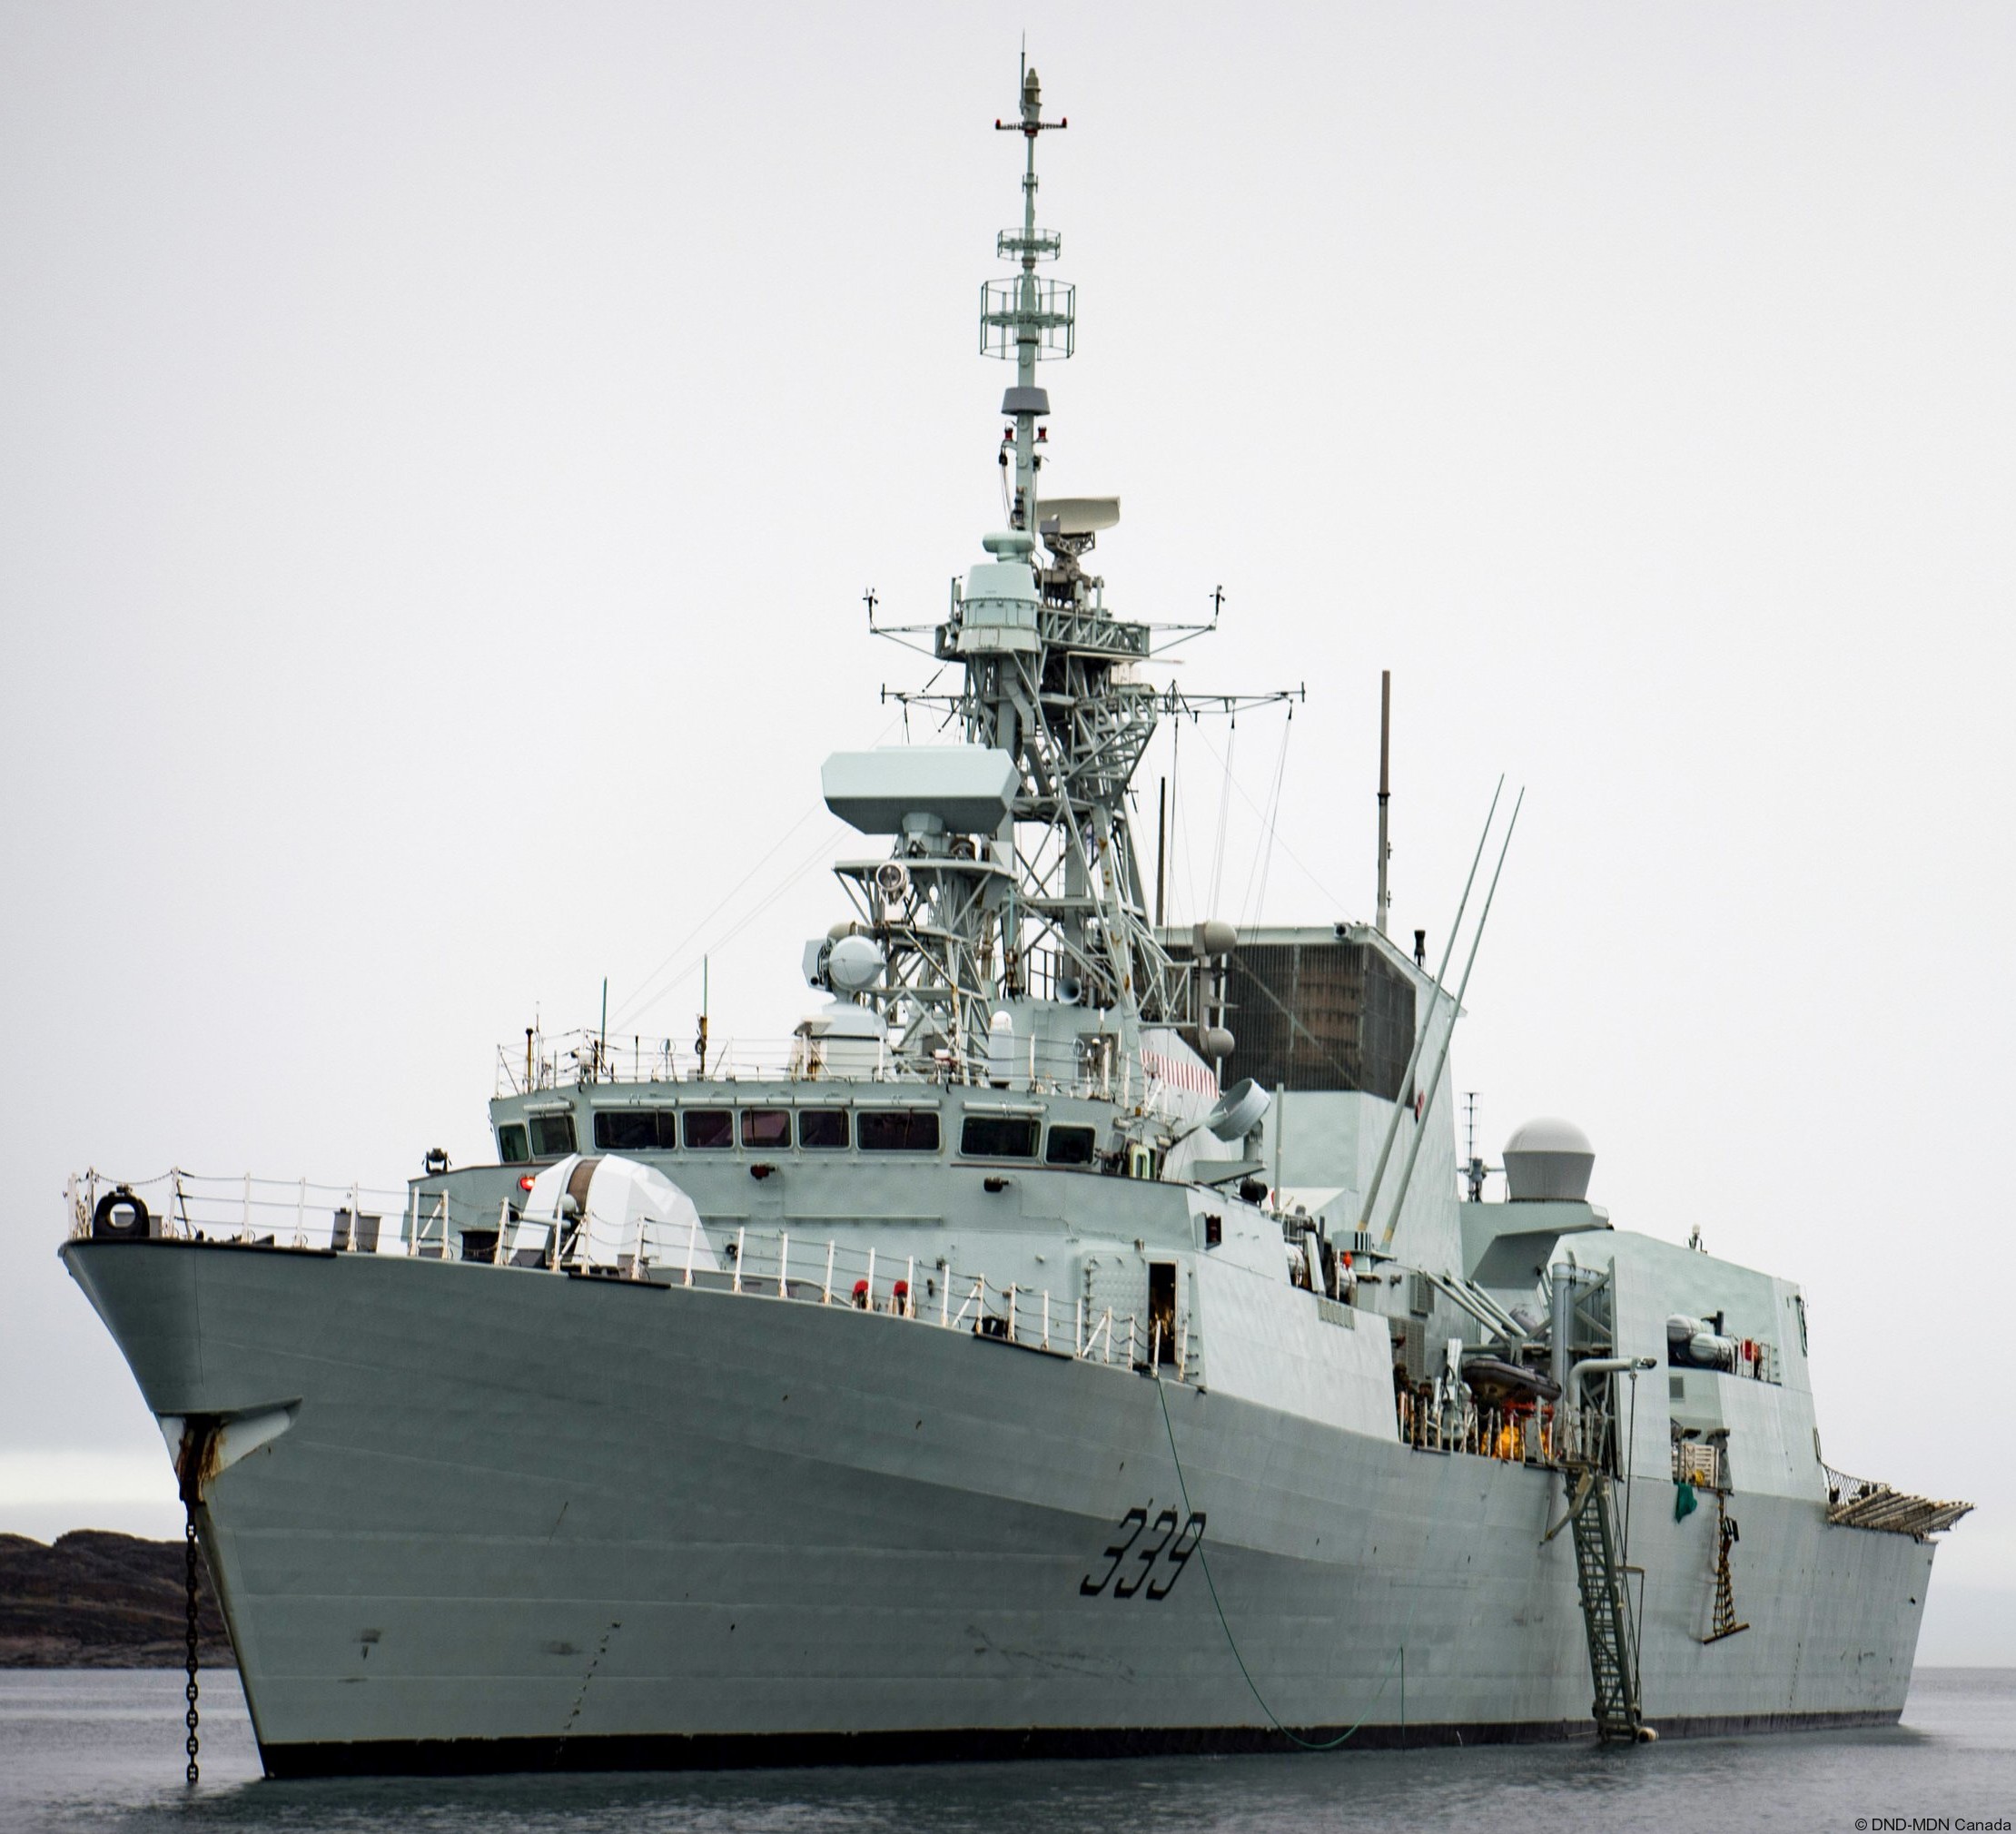 ffh-339 hmcs charlottetown halifax class helicopter patrol frigate ncsm royal canadian navy 20